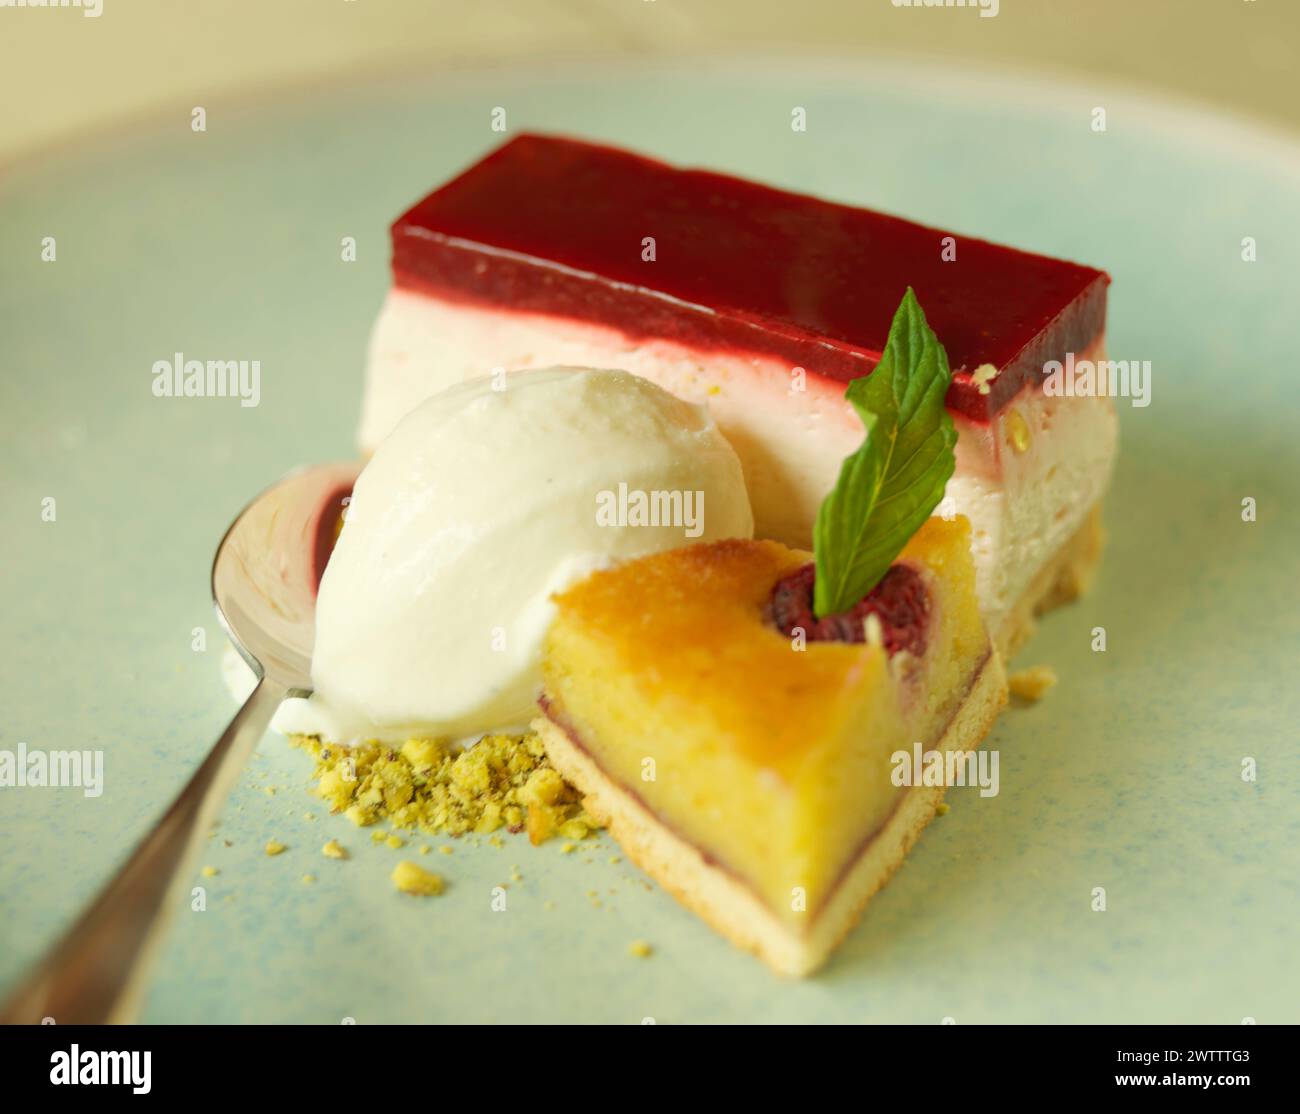 Slice of cheesecake with a scoop of ice cream on a plate Stock Photo